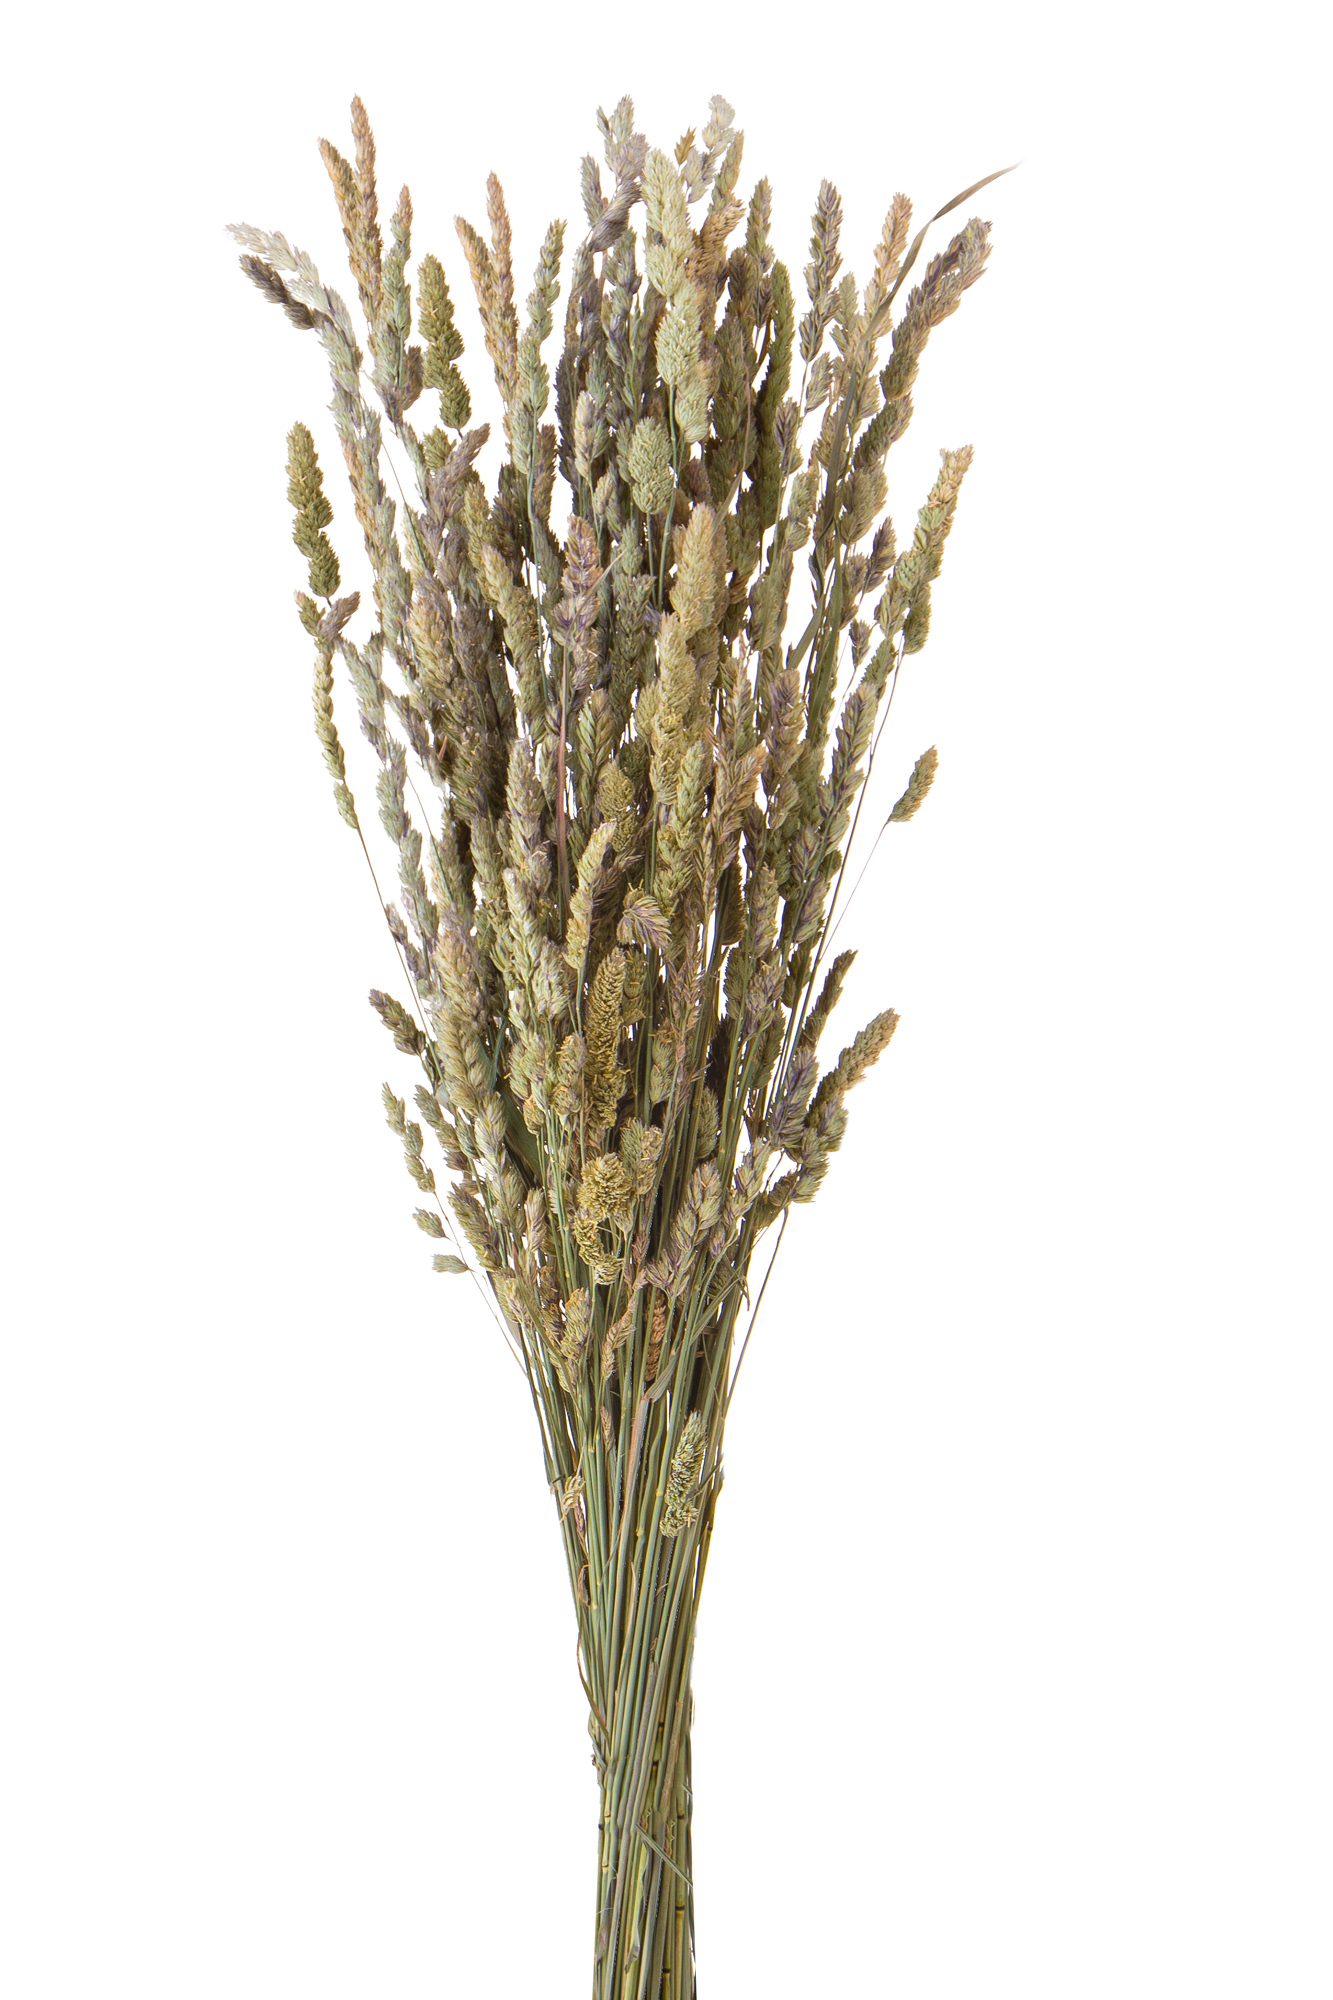 NATURAL PRODUCTS DRIED FLOWERS AND ERBS,PALEONE - DACTILIS NAT A KG